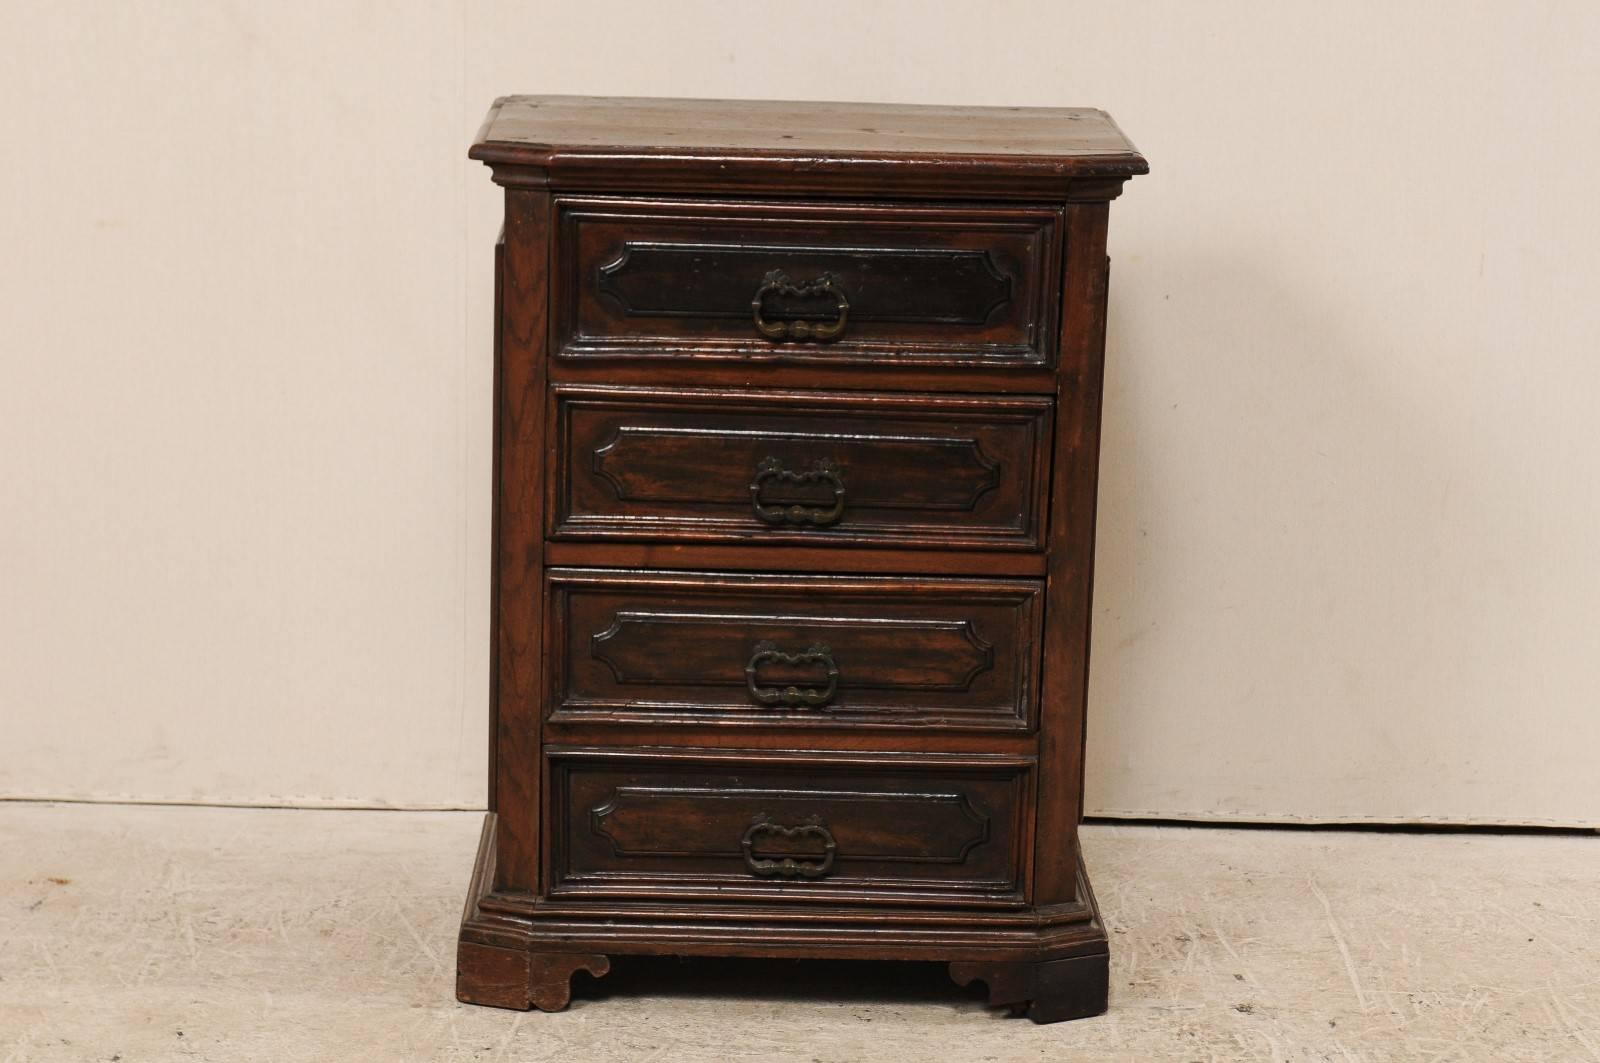 Carved Late 18th Century Italian Four-Drawer Petite Rich Walnut Wood Commode